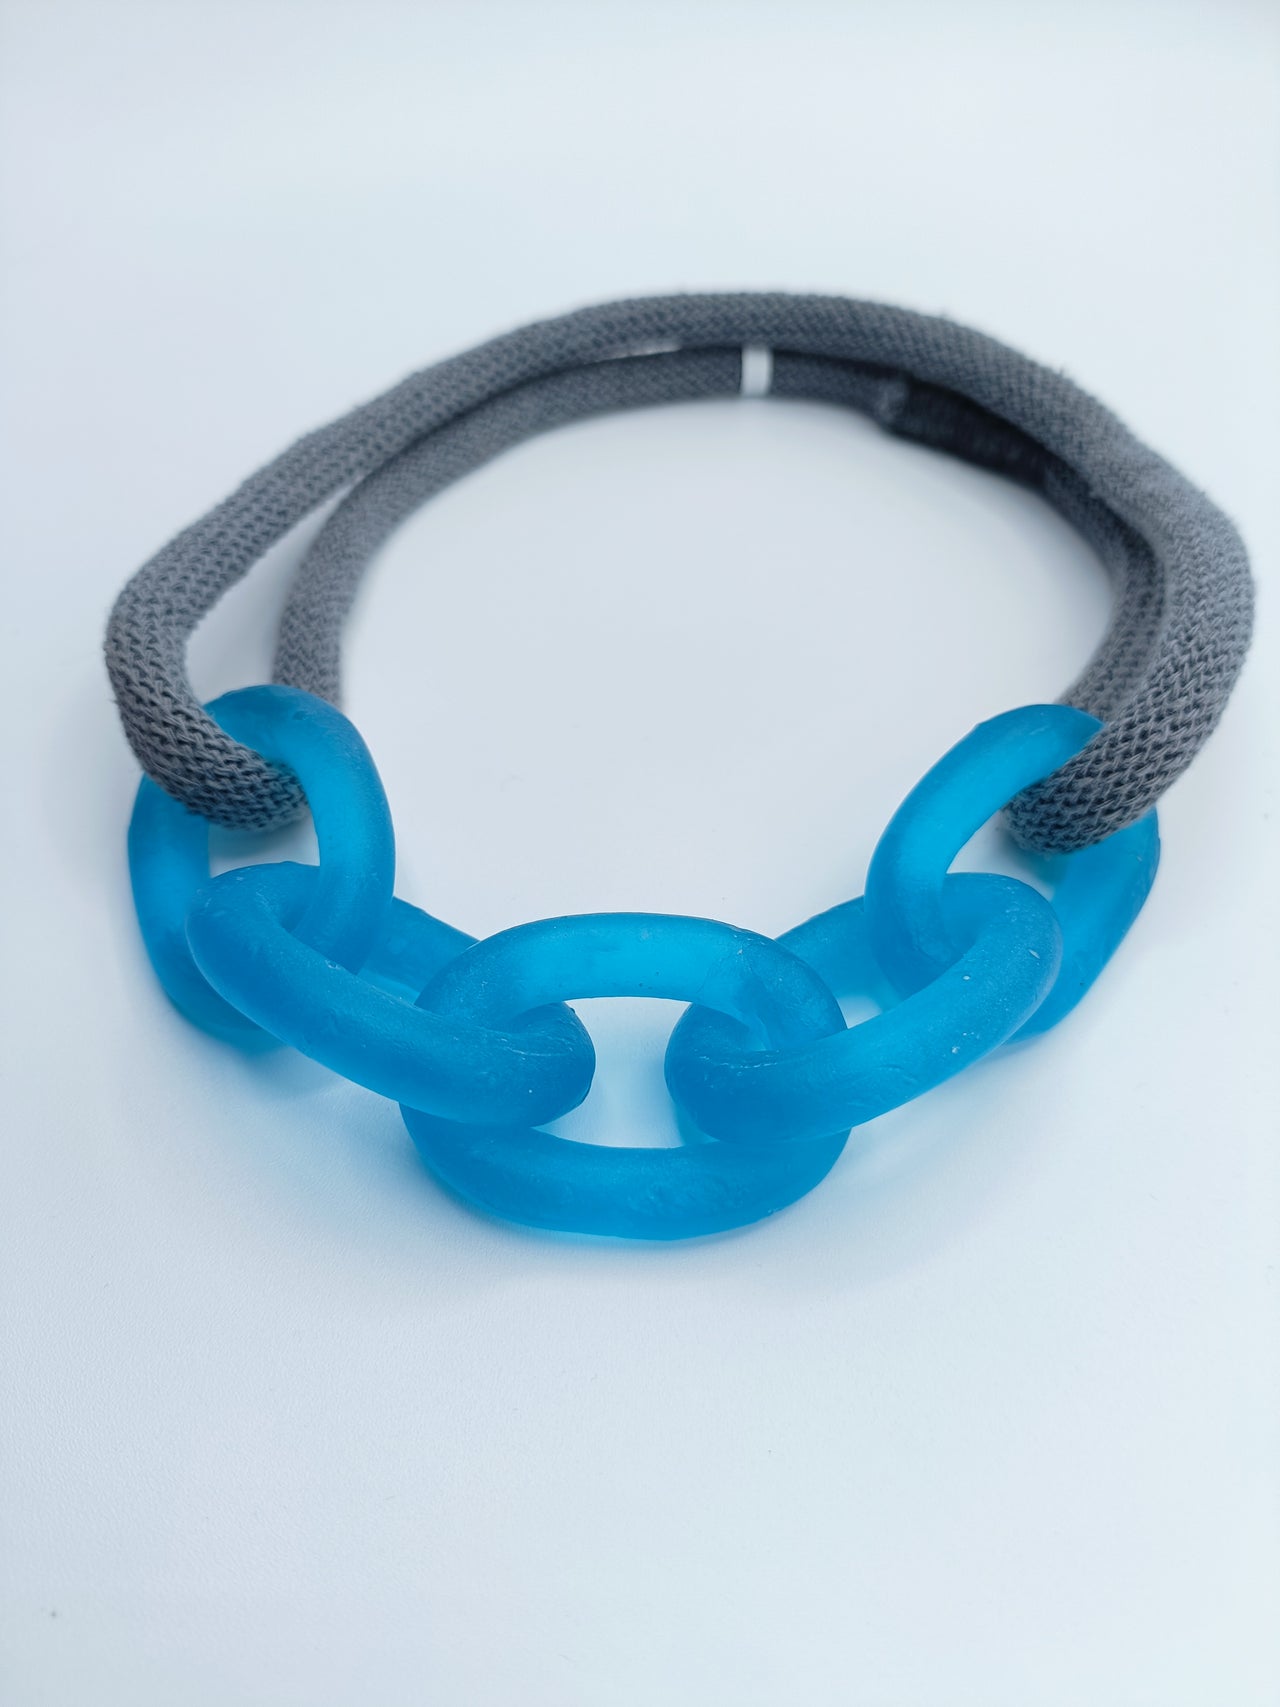 Elusive Blue Five Link Chain Mooring Necklace